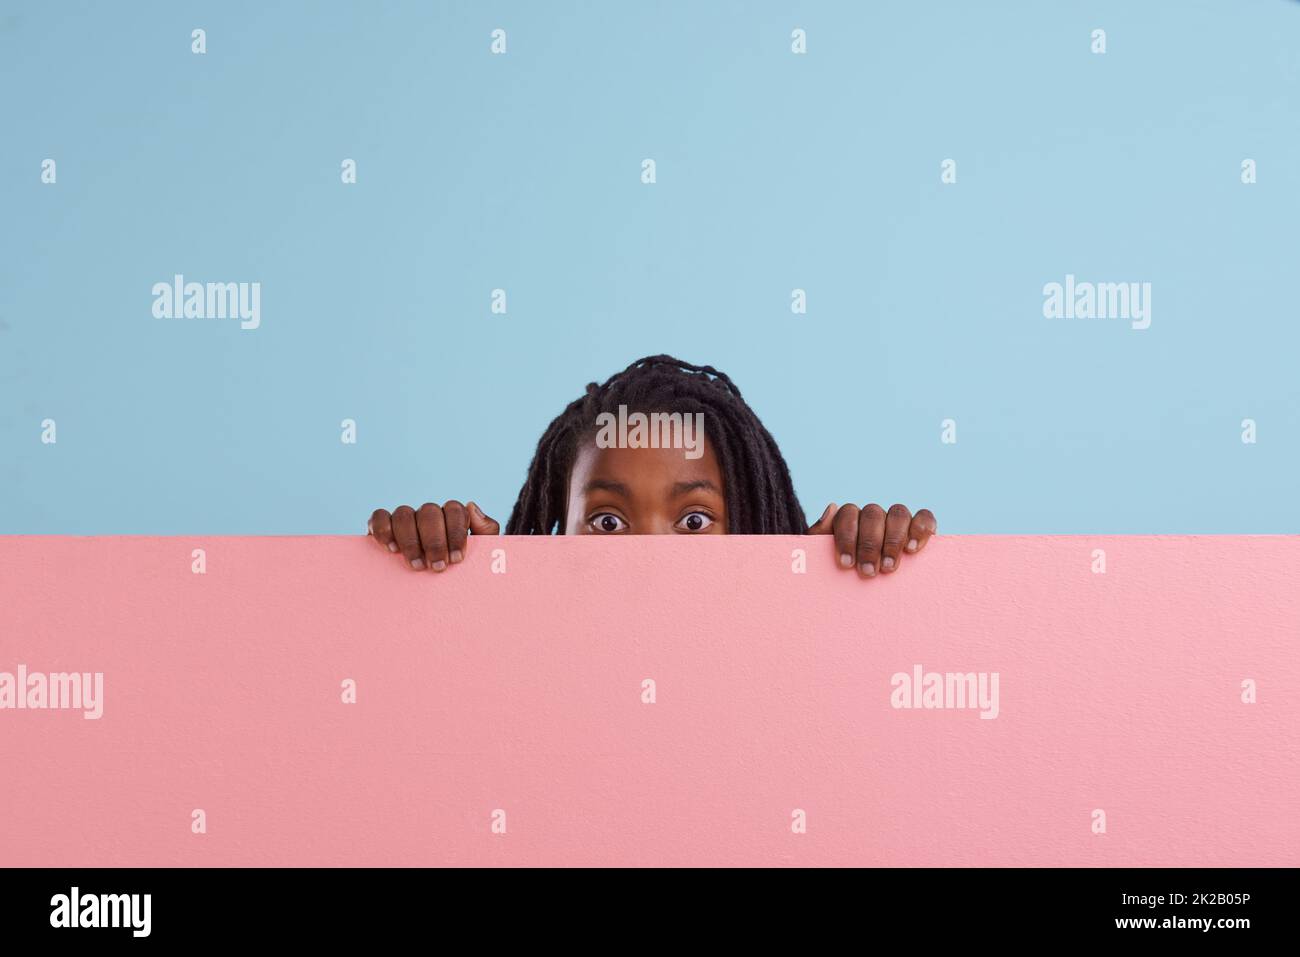 Say what. Studio portrait of a young boy peering from behind a blank signboard. Stock Photo